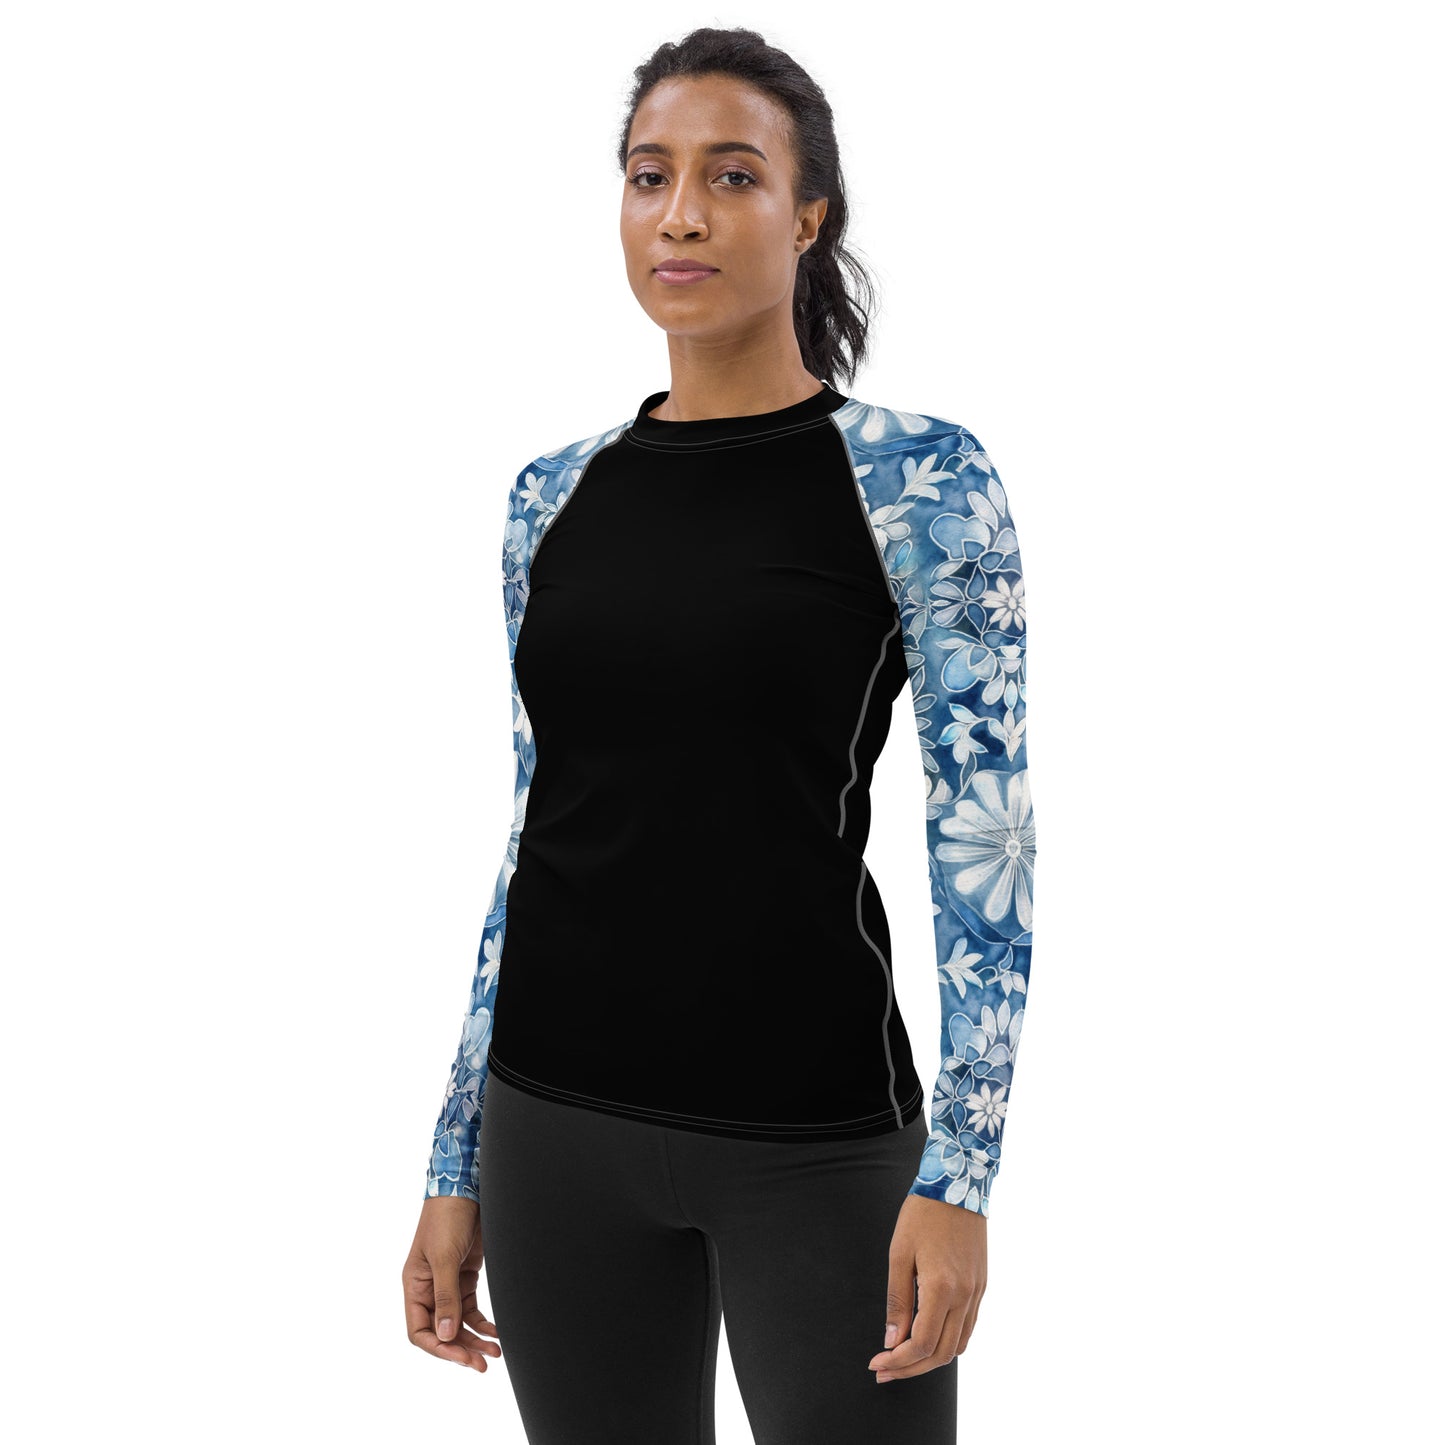 Blue with White Flowers Sleeves and Black Body - Women's Rash Guard